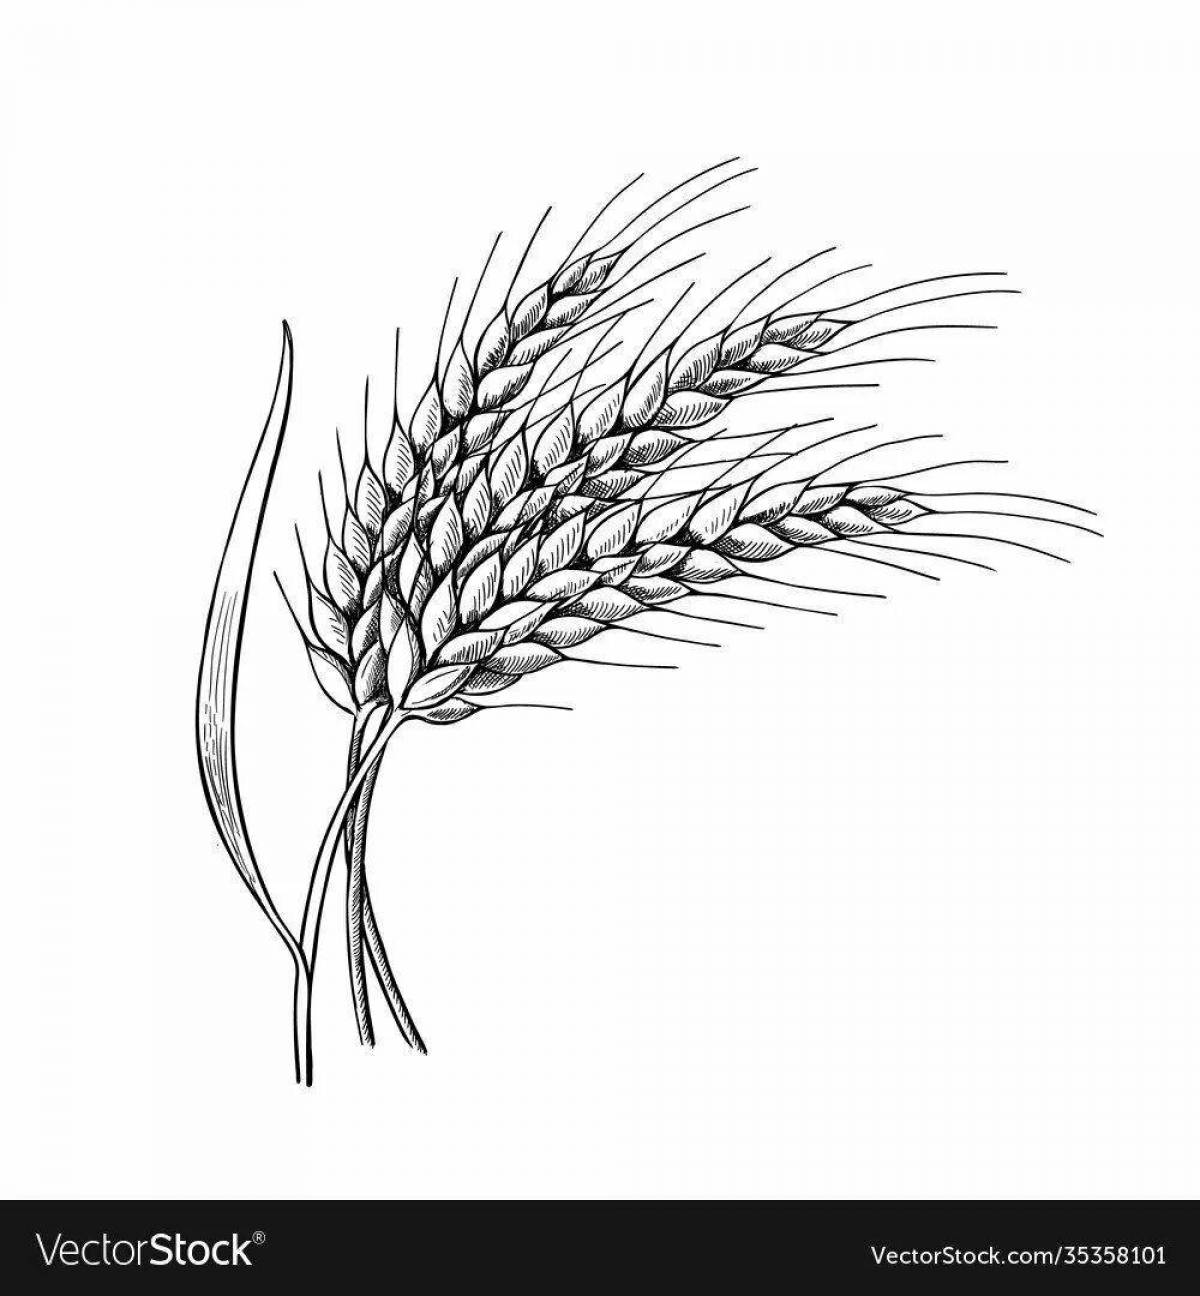 Adorable wheat ear coloring book for kids